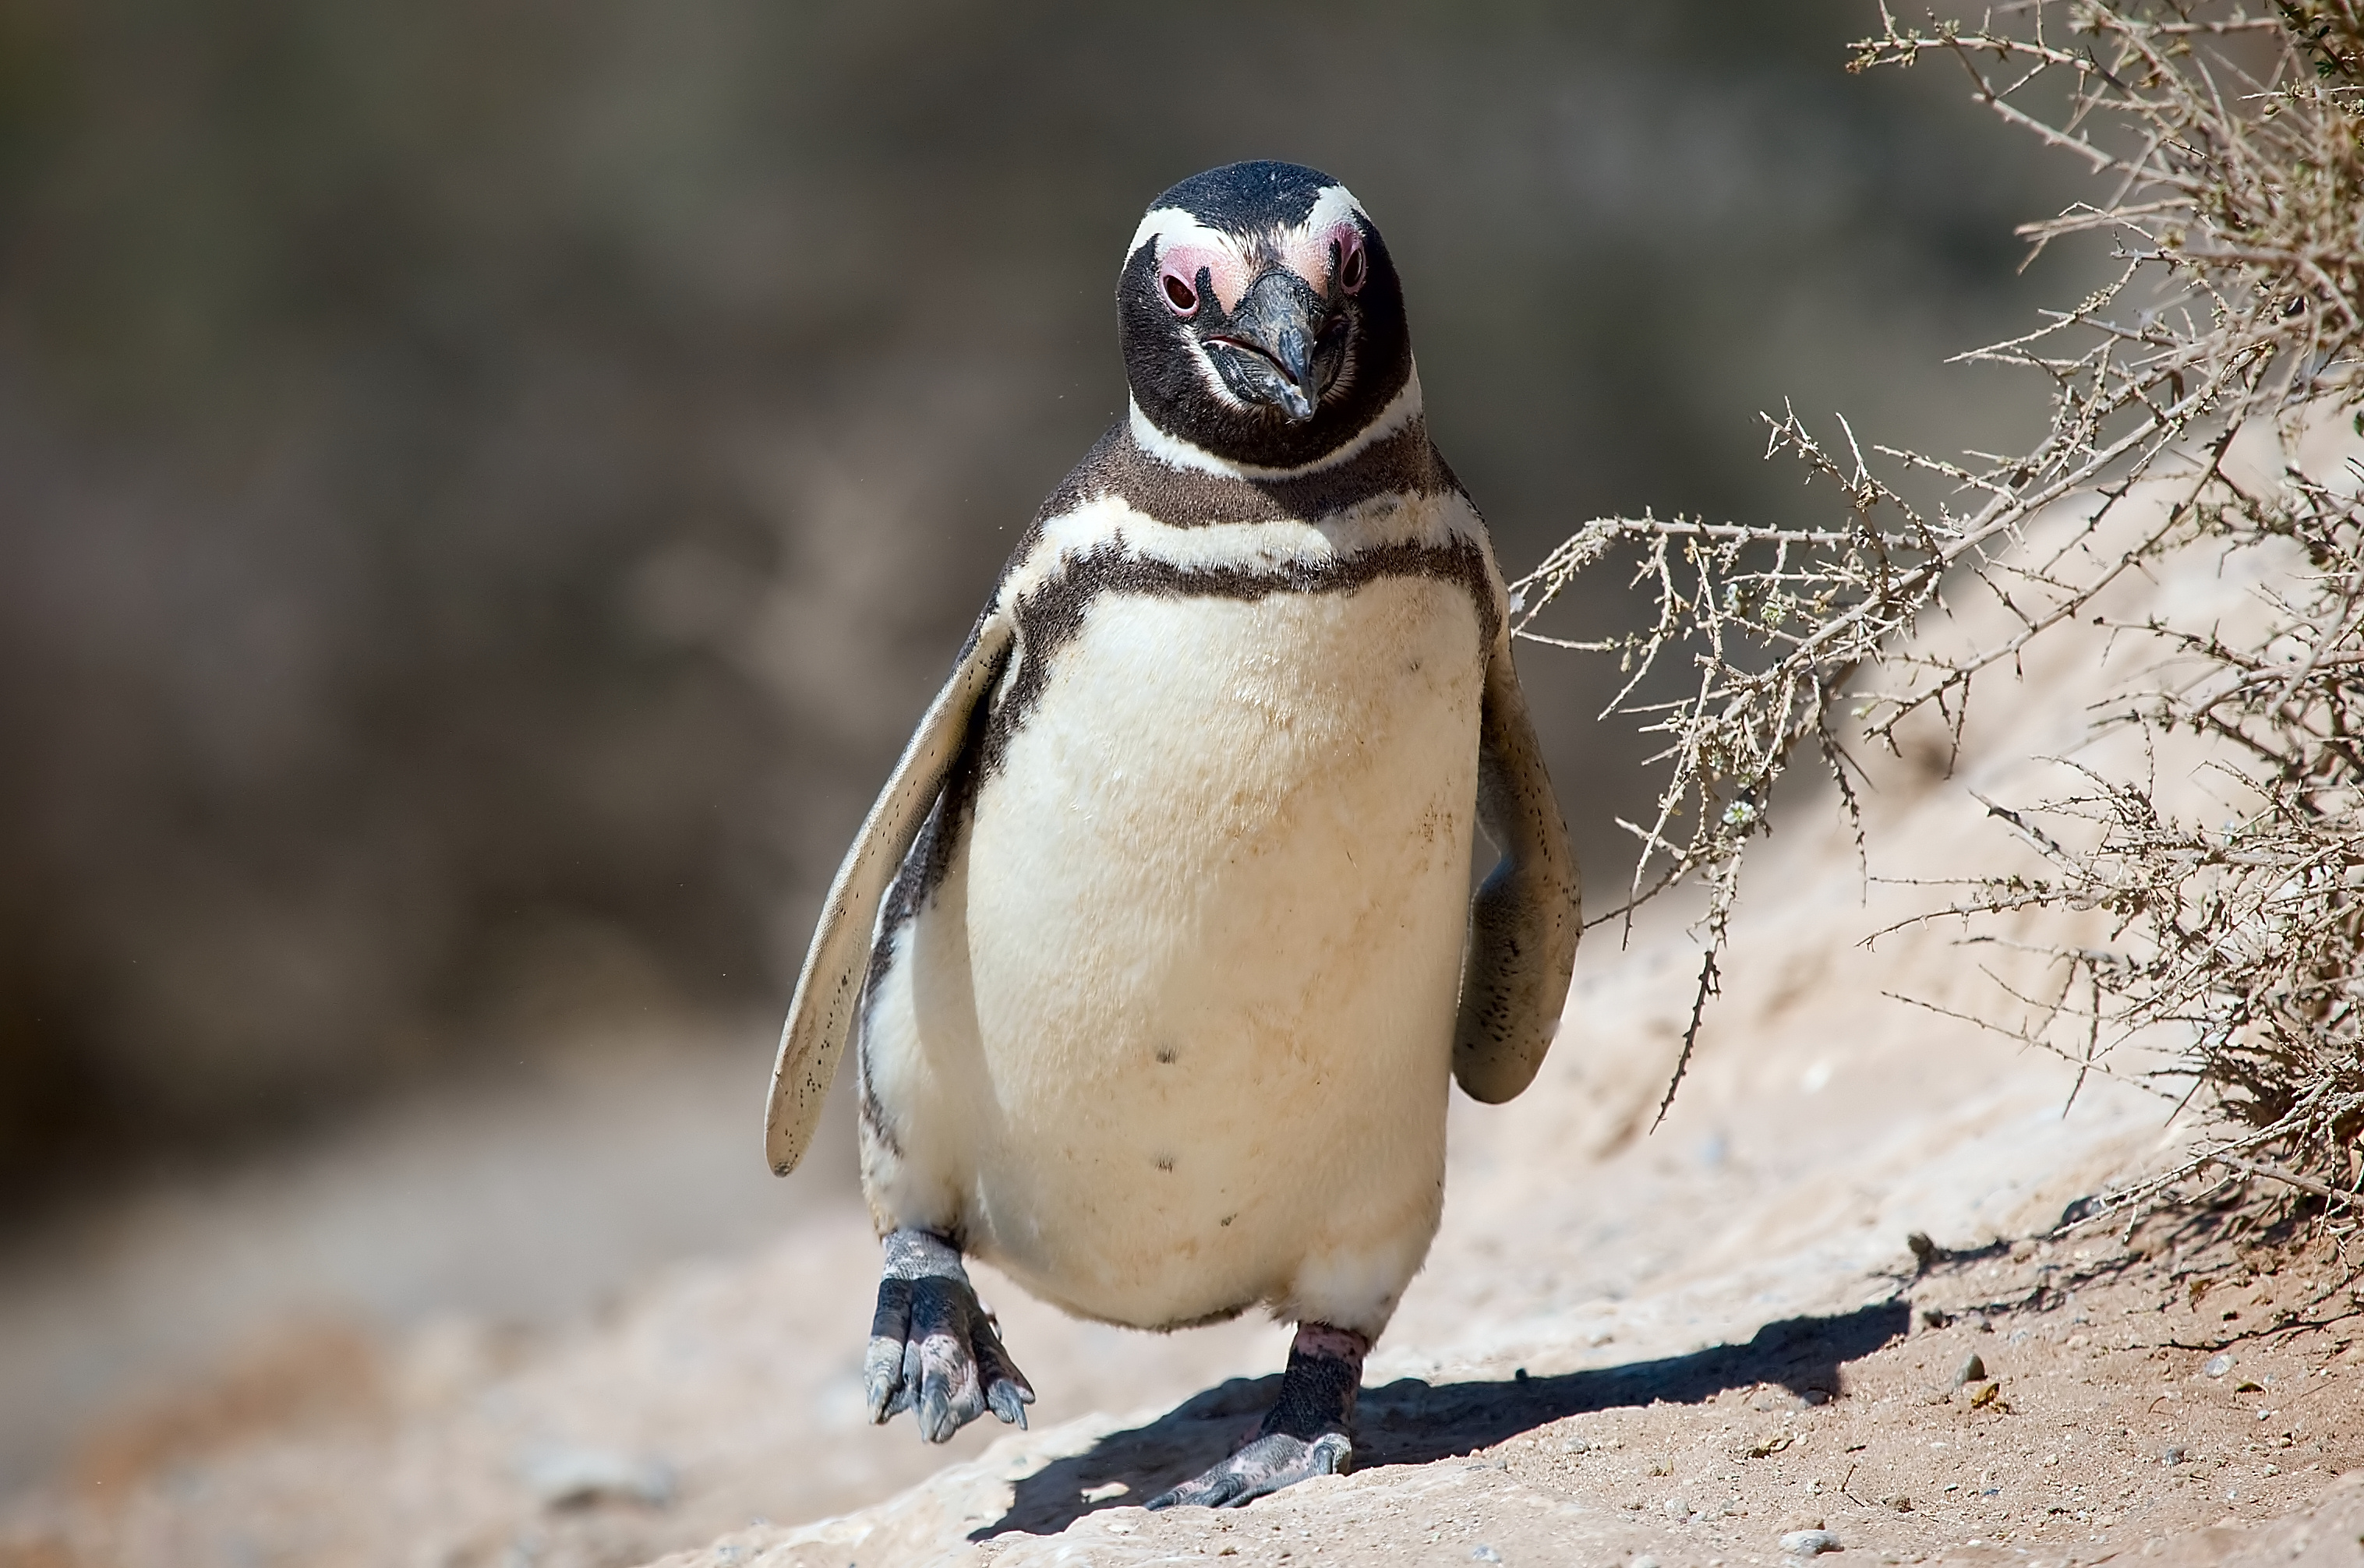 Coming Home to Roost: A case of parasites relying on ancestral DNA to take advantage of a new penguin host species?